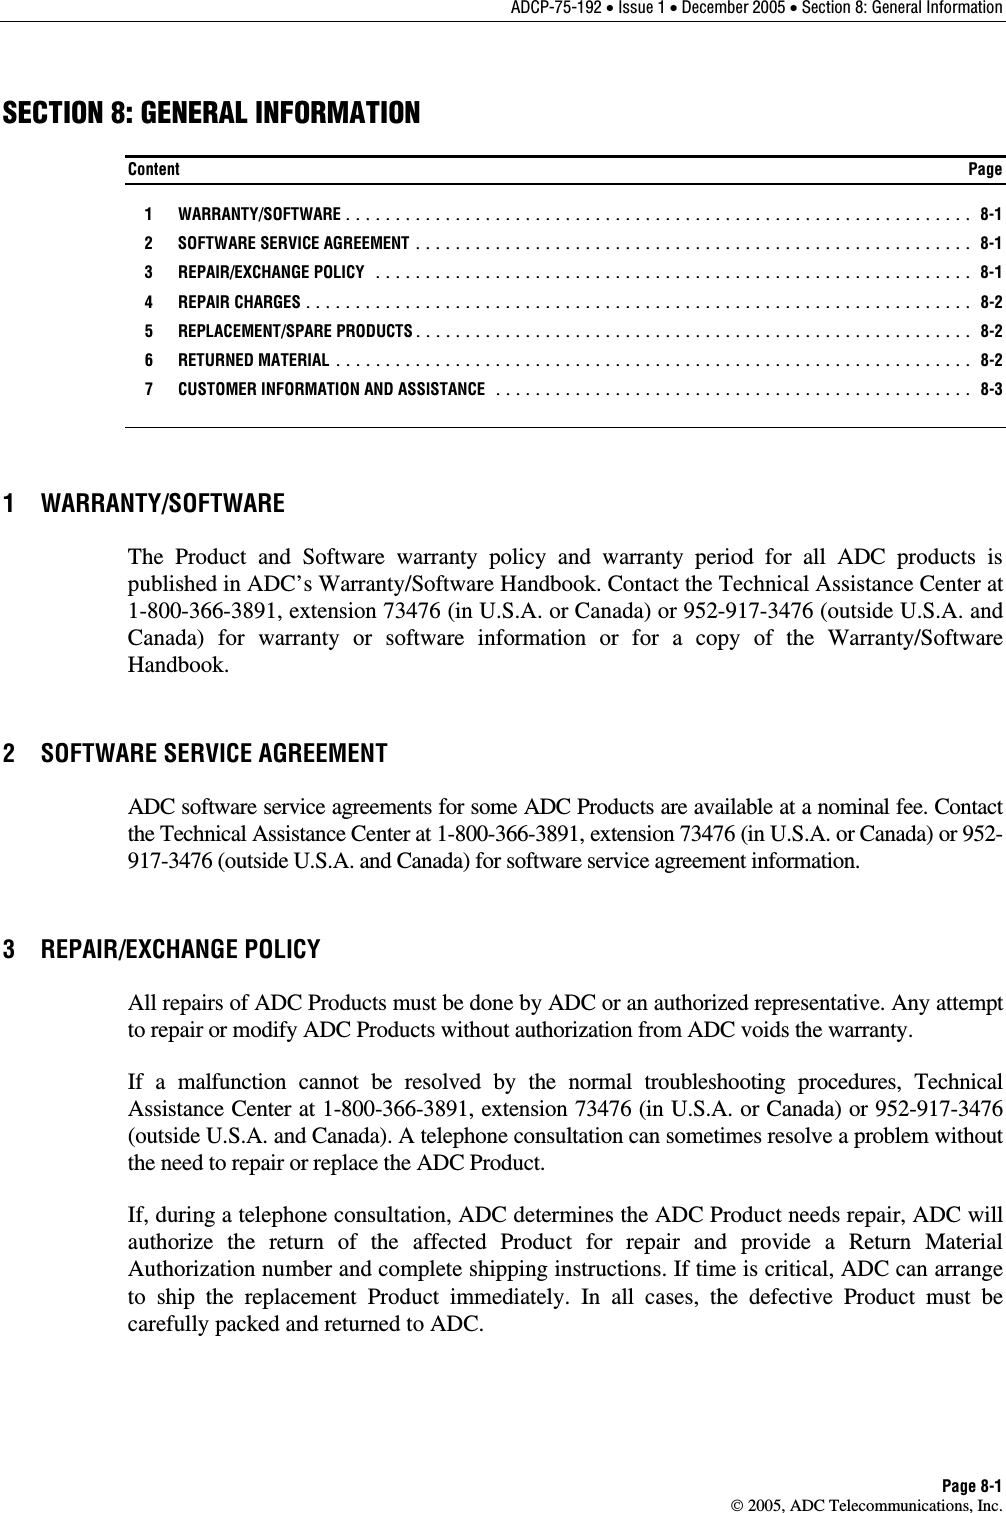 ADCP-75-192 • Issue 1 • December 2005 • Section 8: General Information Page 8-1  2005, ADC Telecommunications, Inc. SECTION 8: GENERAL INFORMATION Content  Page  1  WARRANTY/SOFTWARE ............................................................... 8-1   2  SOFTWARE SERVICE AGREEMENT ........................................................ 8-1  3  REPAIR/EXCHANGE POLICY ............................................................ 8-1  4  REPAIR CHARGES................................................................... 8-2  5  REPLACEMENT/SPARE PRODUCTS........................................................ 8-2  6  RETURNED MATERIAL ................................................................ 8-2   7  CUSTOMER INFORMATION AND ASSISTANCE ................................................ 8-3 1 WARRANTY/SOFTWARE The Product and Software warranty policy and warranty period for all ADC products is published in ADC’s Warranty/Software Handbook. Contact the Technical Assistance Center at 1-800-366-3891, extension 73476 (in U.S.A. or Canada) or 952-917-3476 (outside U.S.A. and Canada) for warranty or software information or for a copy of the Warranty/Software Handbook. 2  SOFTWARE SERVICE AGREEMENT ADC software service agreements for some ADC Products are available at a nominal fee. Contact the Technical Assistance Center at 1-800-366-3891, extension 73476 (in U.S.A. or Canada) or 952-917-3476 (outside U.S.A. and Canada) for software service agreement information.  3 REPAIR/EXCHANGE POLICY All repairs of ADC Products must be done by ADC or an authorized representative. Any attempt to repair or modify ADC Products without authorization from ADC voids the warranty. If a malfunction cannot be resolved by the normal troubleshooting procedures, Technical Assistance Center at 1-800-366-3891, extension 73476 (in U.S.A. or Canada) or 952-917-3476 (outside U.S.A. and Canada). A telephone consultation can sometimes resolve a problem without the need to repair or replace the ADC Product. If, during a telephone consultation, ADC determines the ADC Product needs repair, ADC will authorize the return of the affected Product for repair and provide a Return Material Authorization number and complete shipping instructions. If time is critical, ADC can arrange to ship the replacement Product immediately. In all cases, the defective Product must be carefully packed and returned to ADC. 